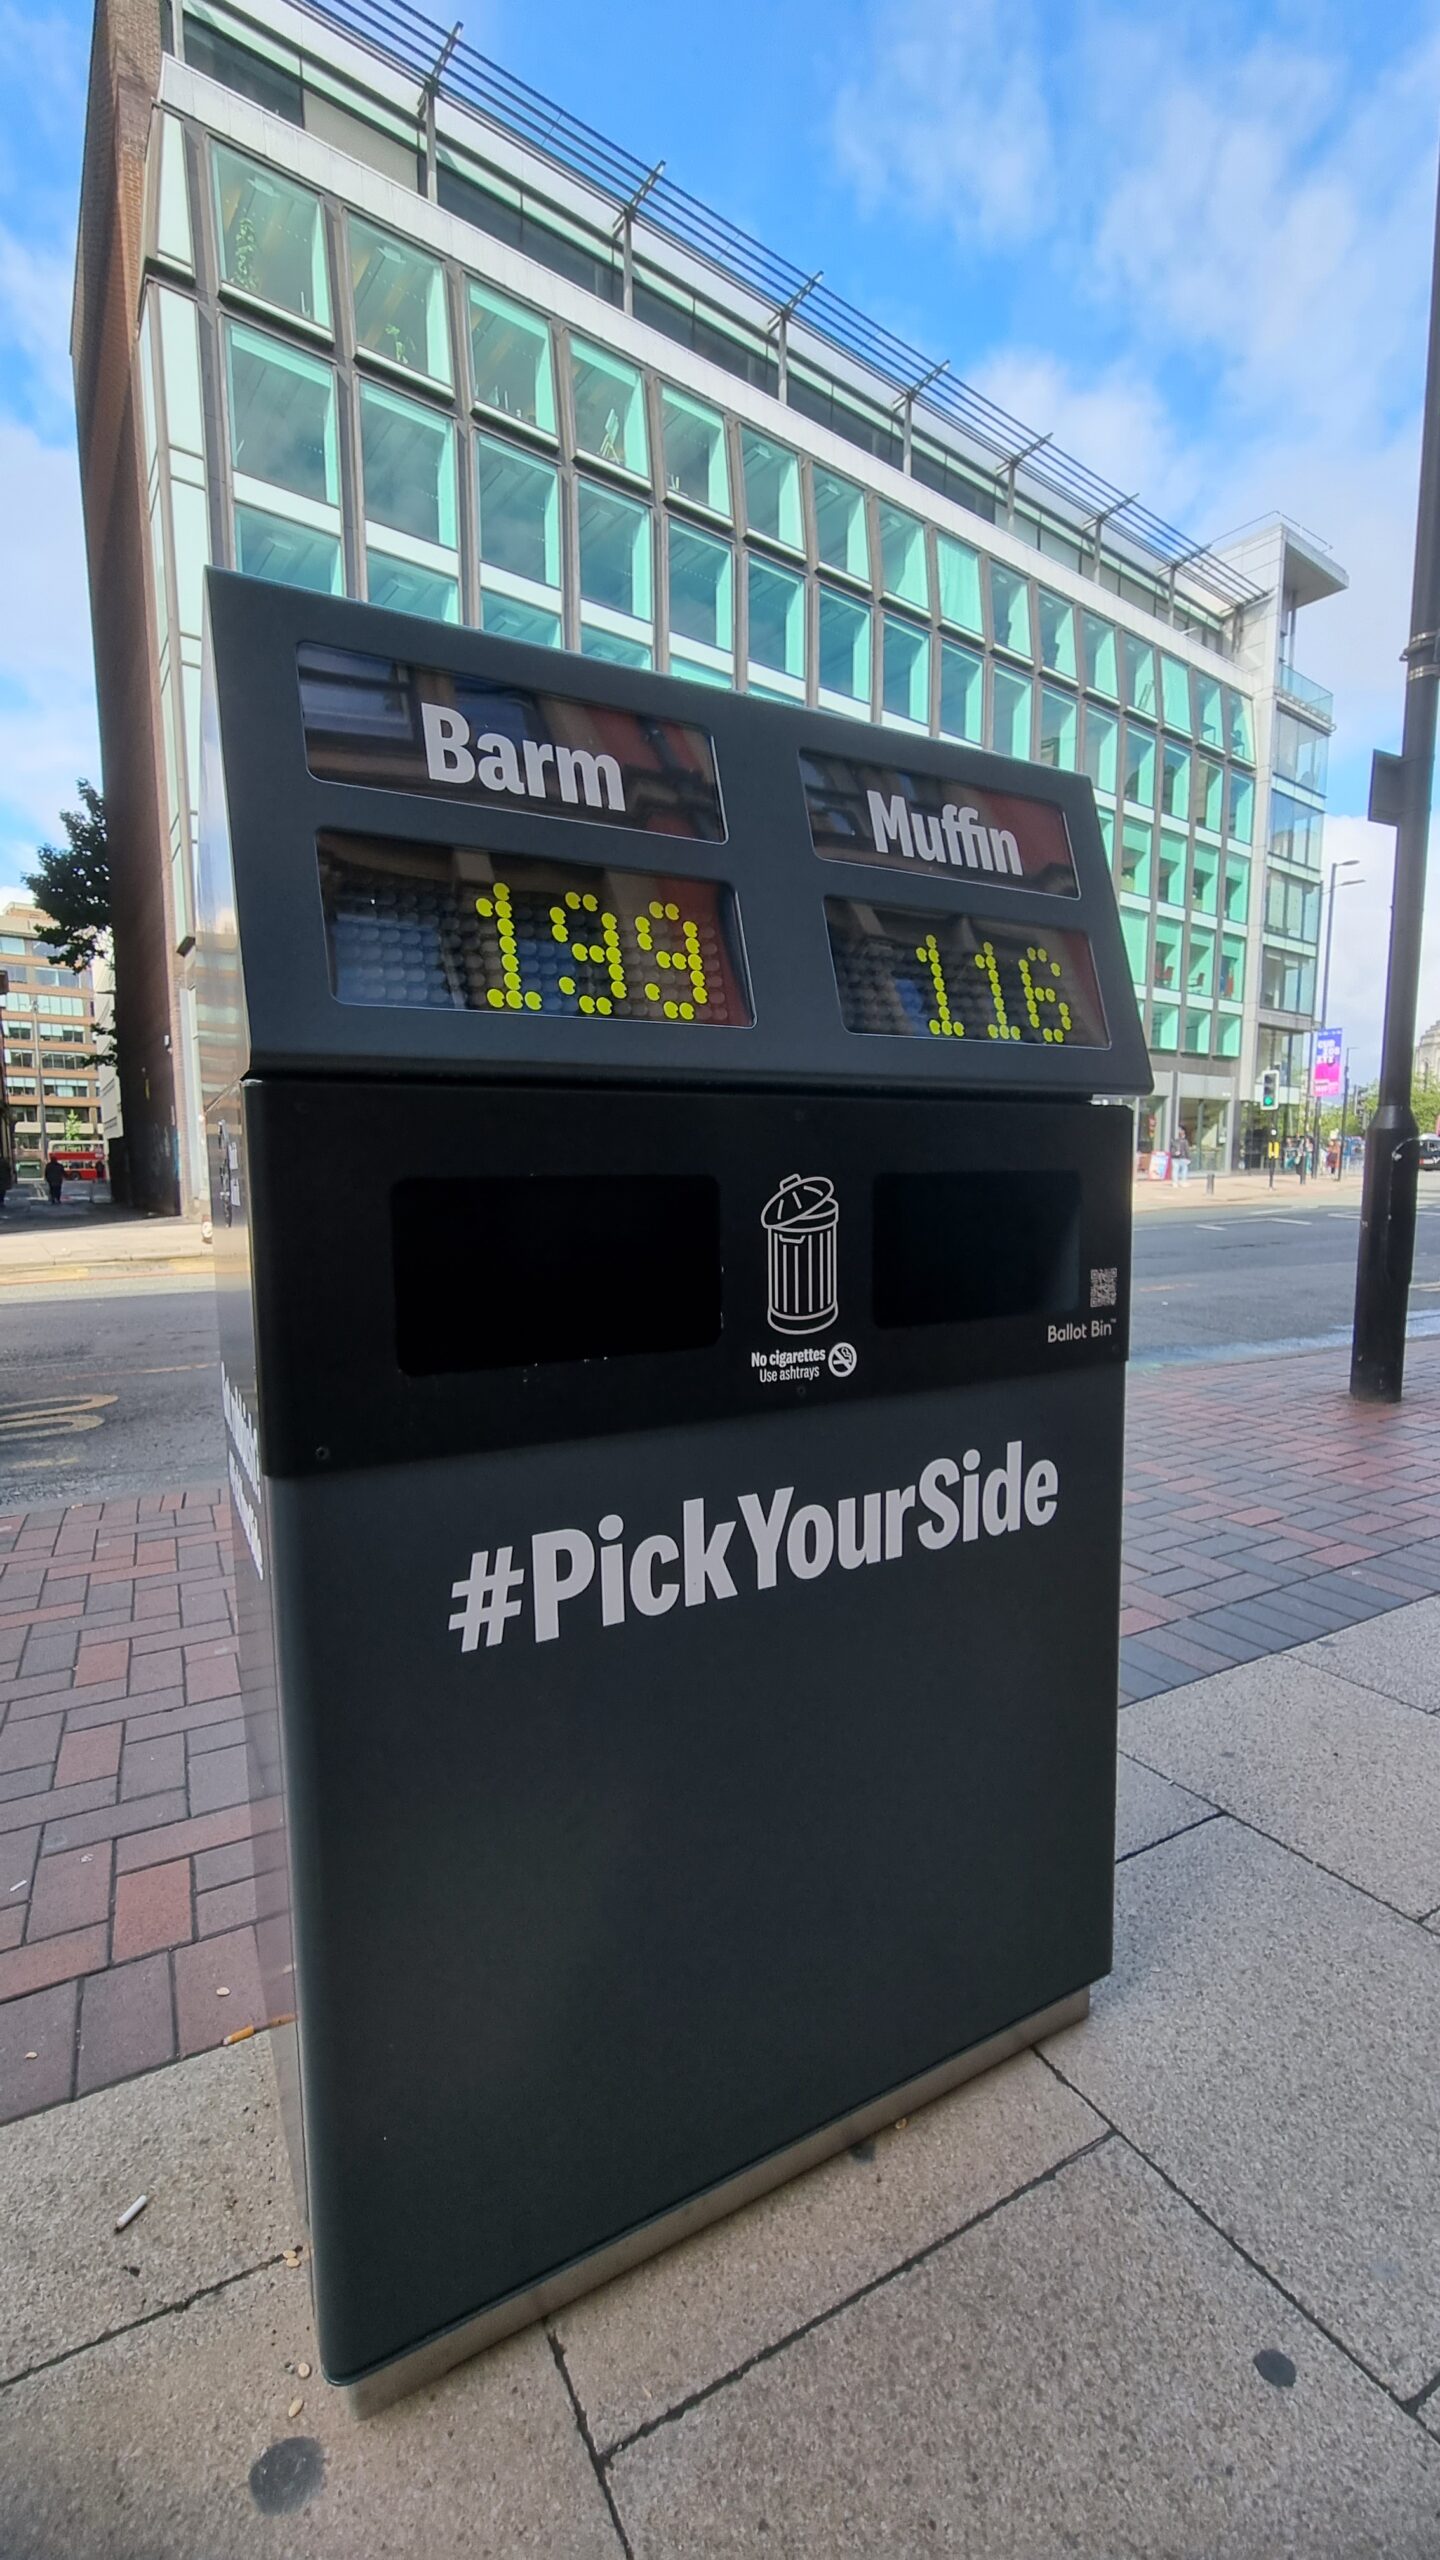 New 'ballot bins' have appeared in Manchester city centre